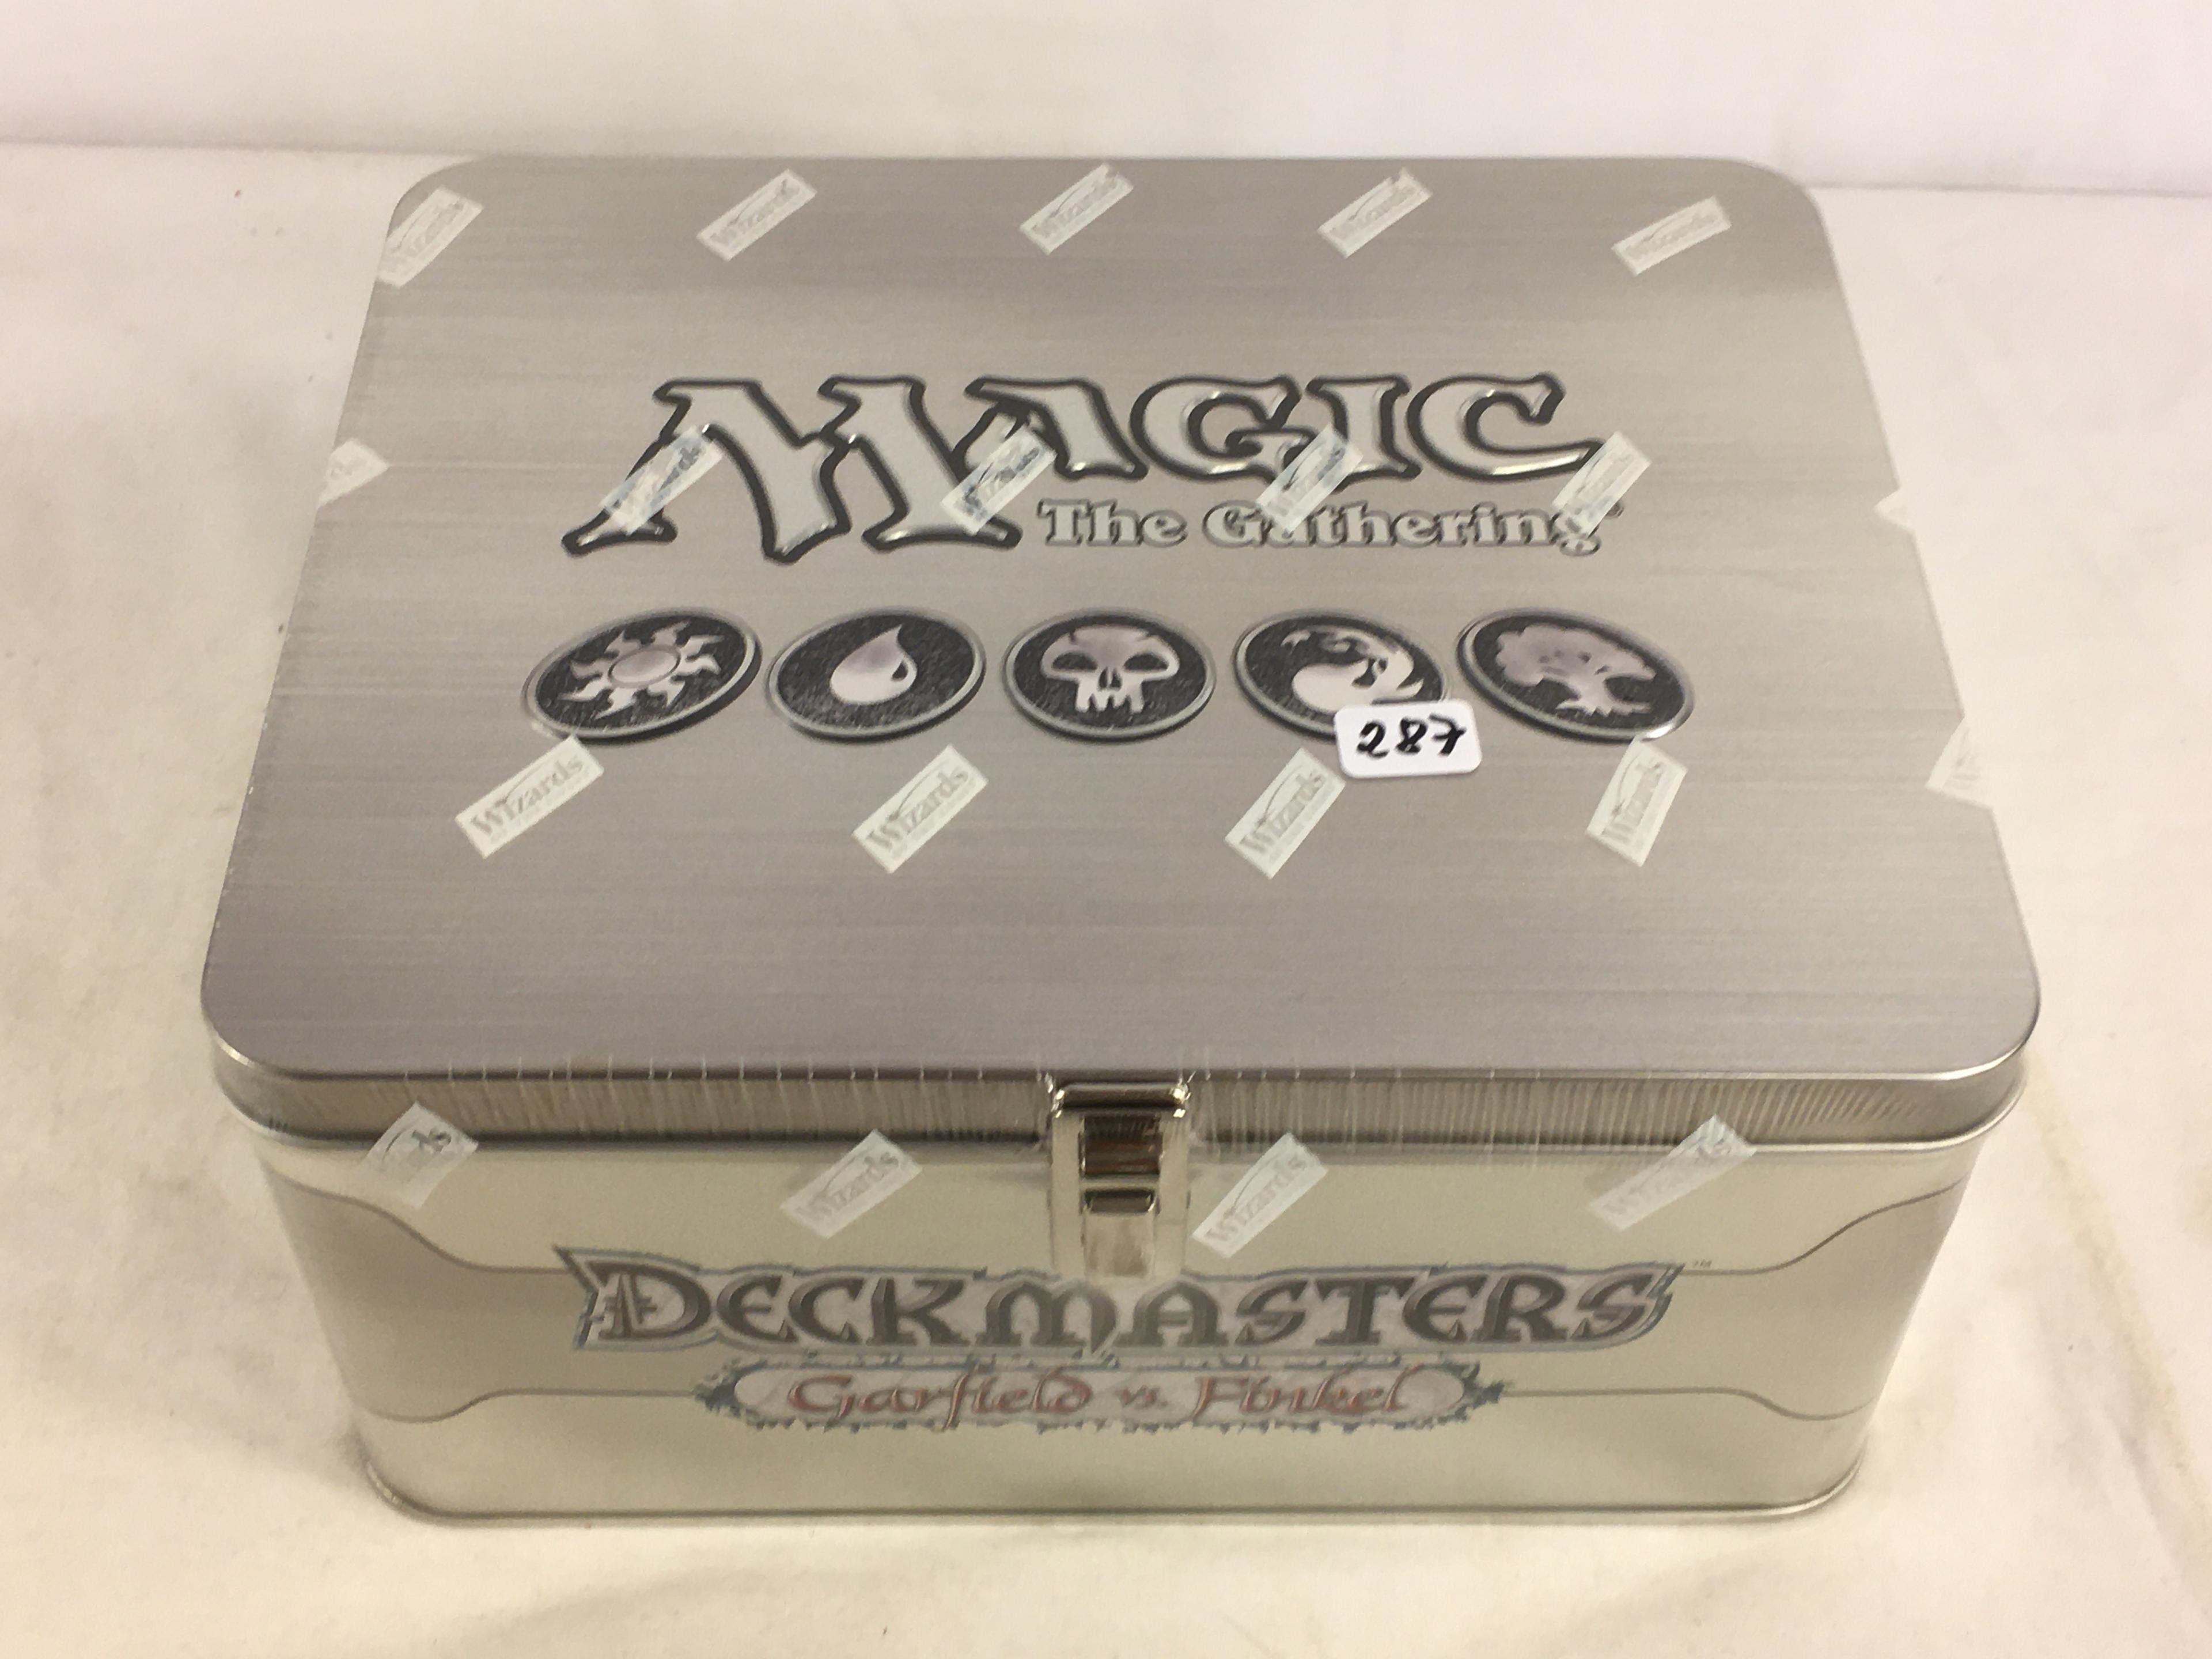 Collector Factory Sealed Magic The Gathering Deckmasters Garfield VS. Fonkel Cards